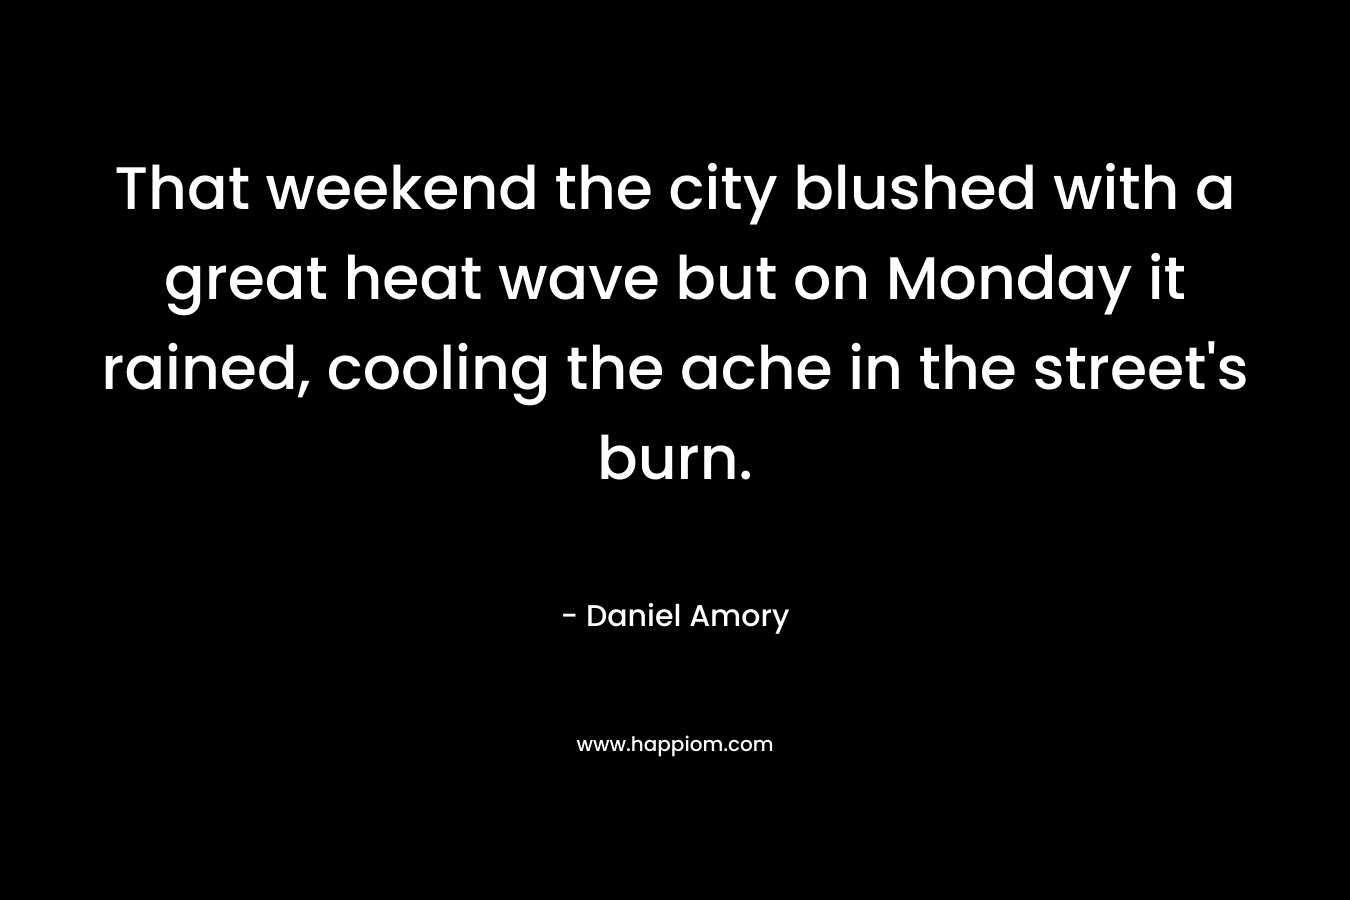 That weekend the city blushed with a great heat wave but on Monday it rained, cooling the ache in the street's burn.